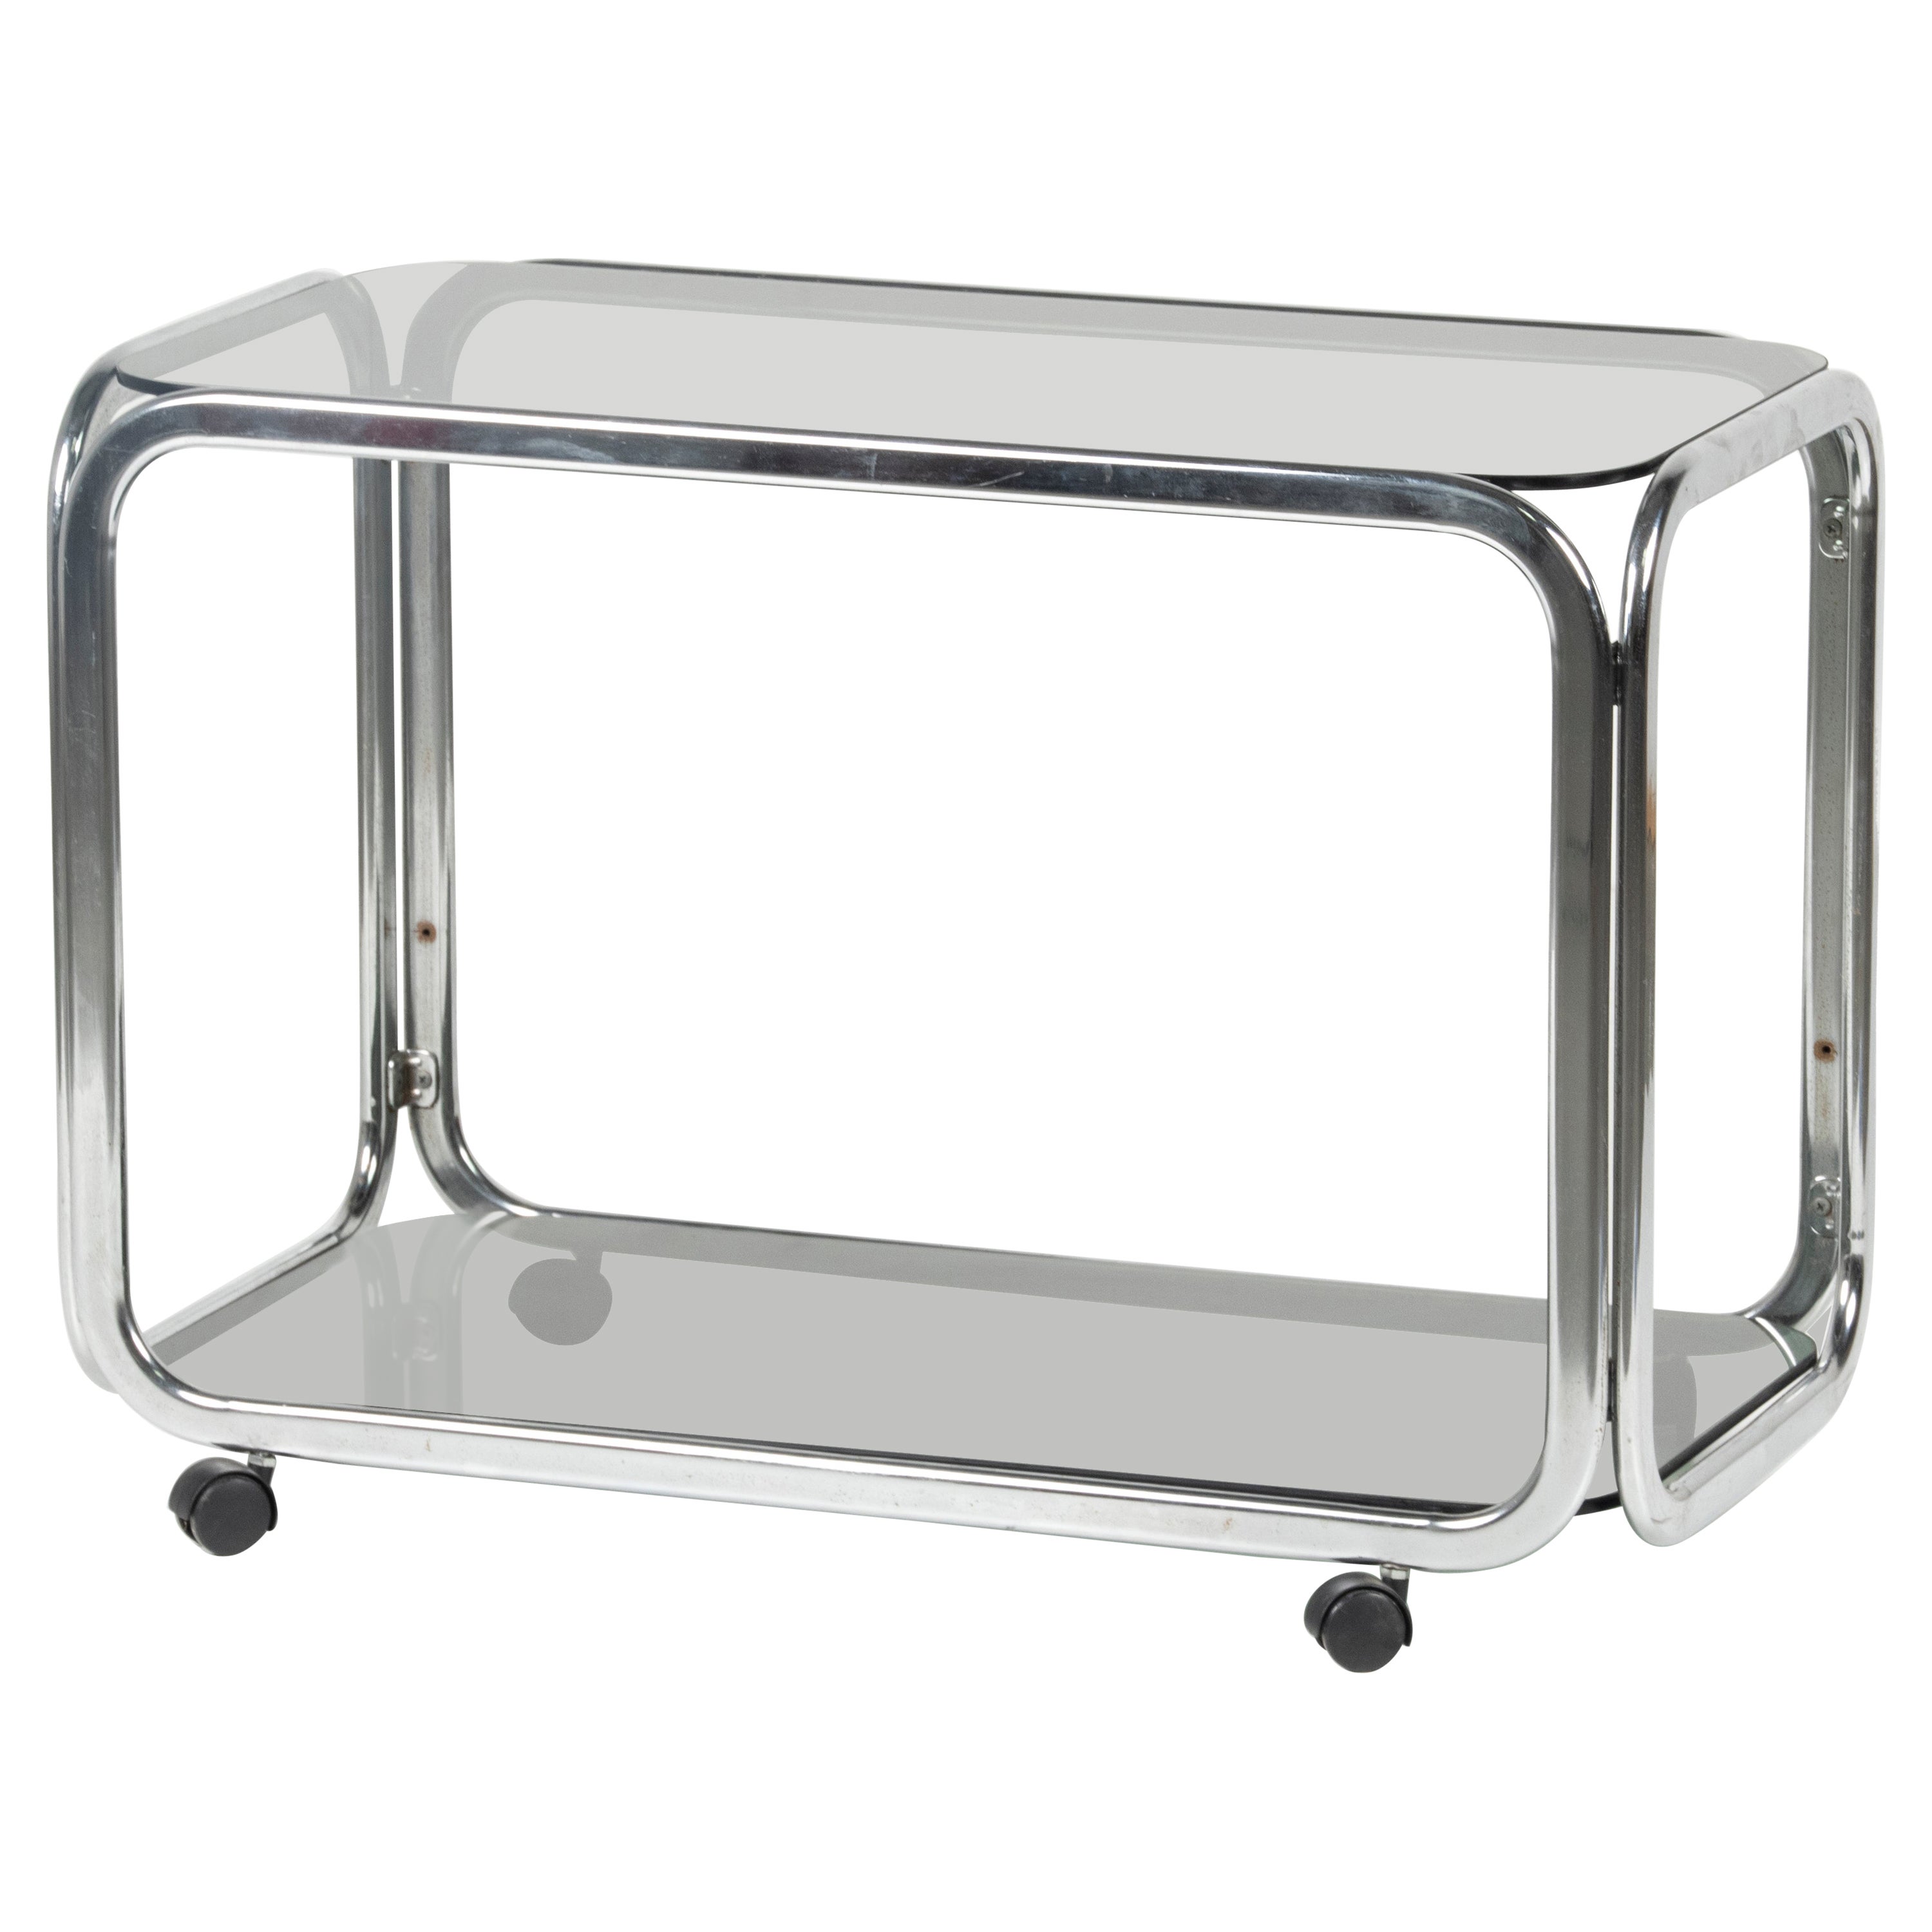 Mid-20th Century Chrome Bar Cart Smoked Glass For Sale